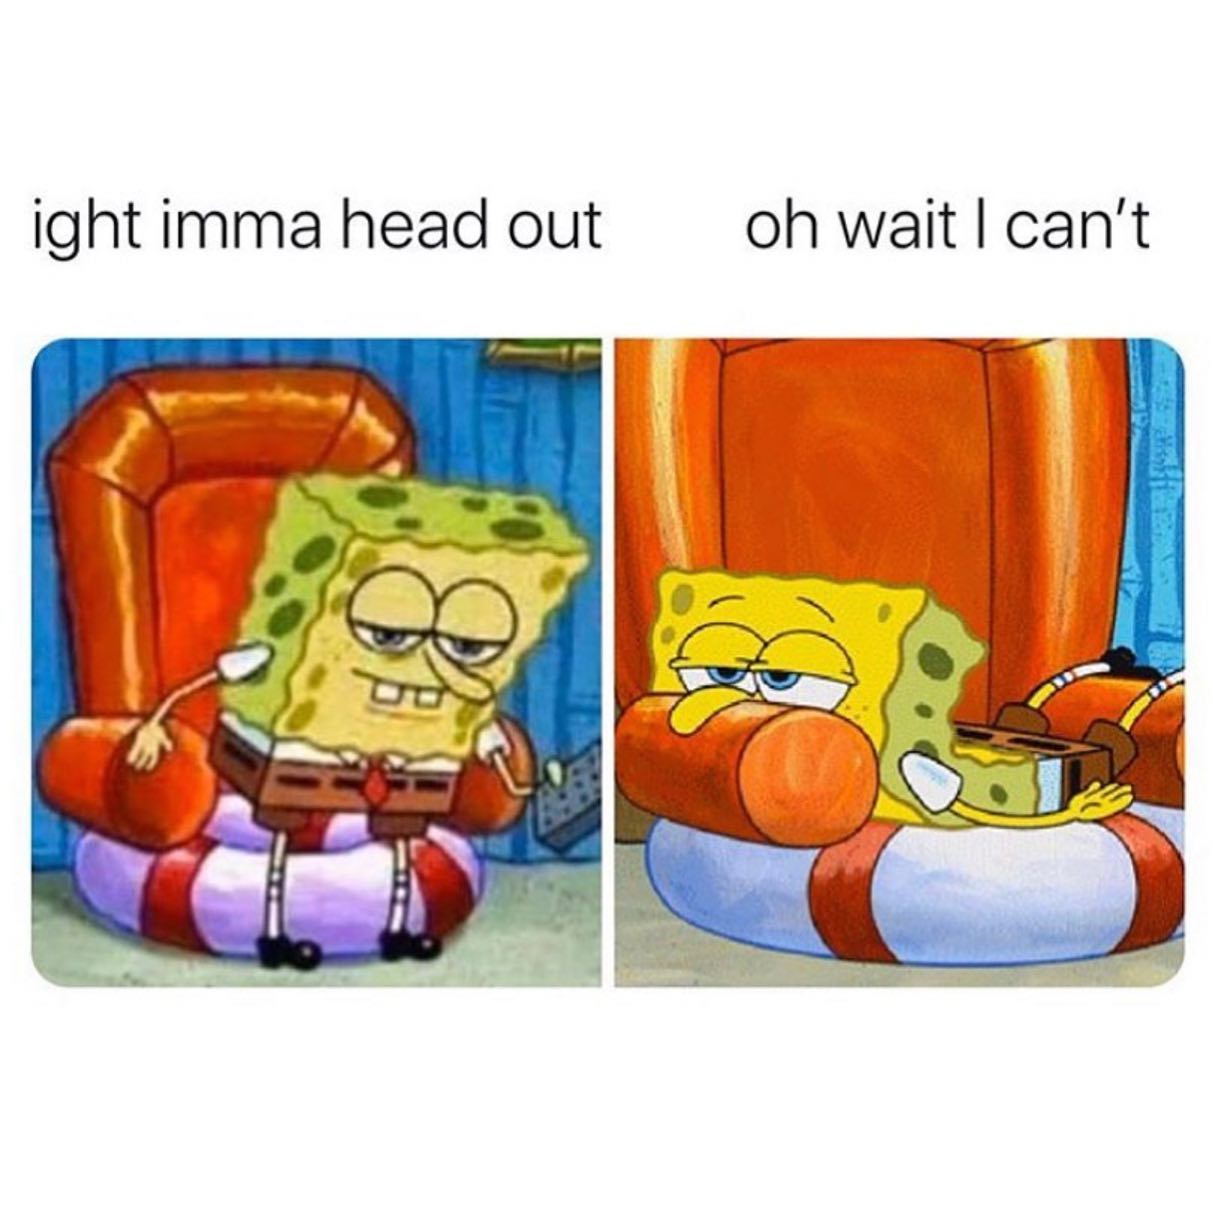 46 of Spongebob's Best 'Ight Imma Head Out' Memes From 2019 